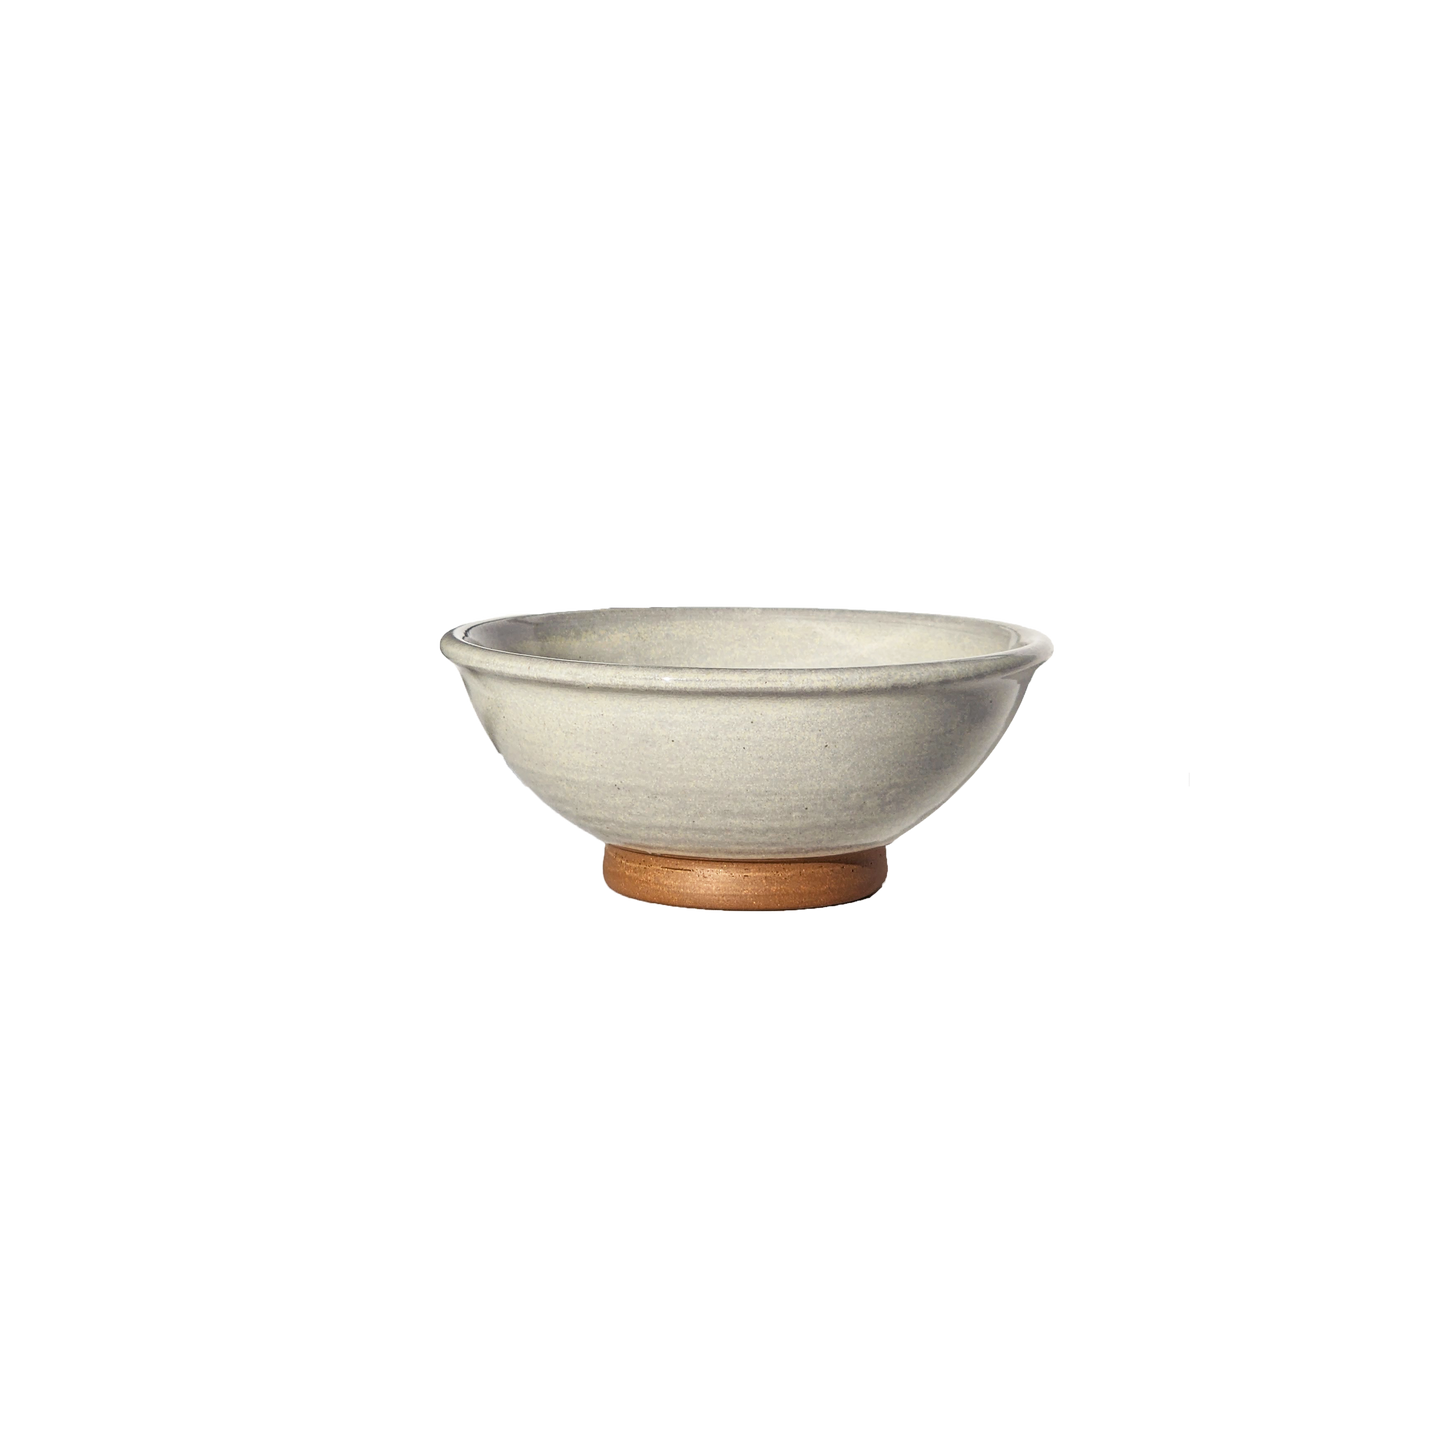 A classic ceramic bowl in pristine white, exuding timeless elegance. Sized at 1 cup, it complements any tableware collection with its versatile simplicity.